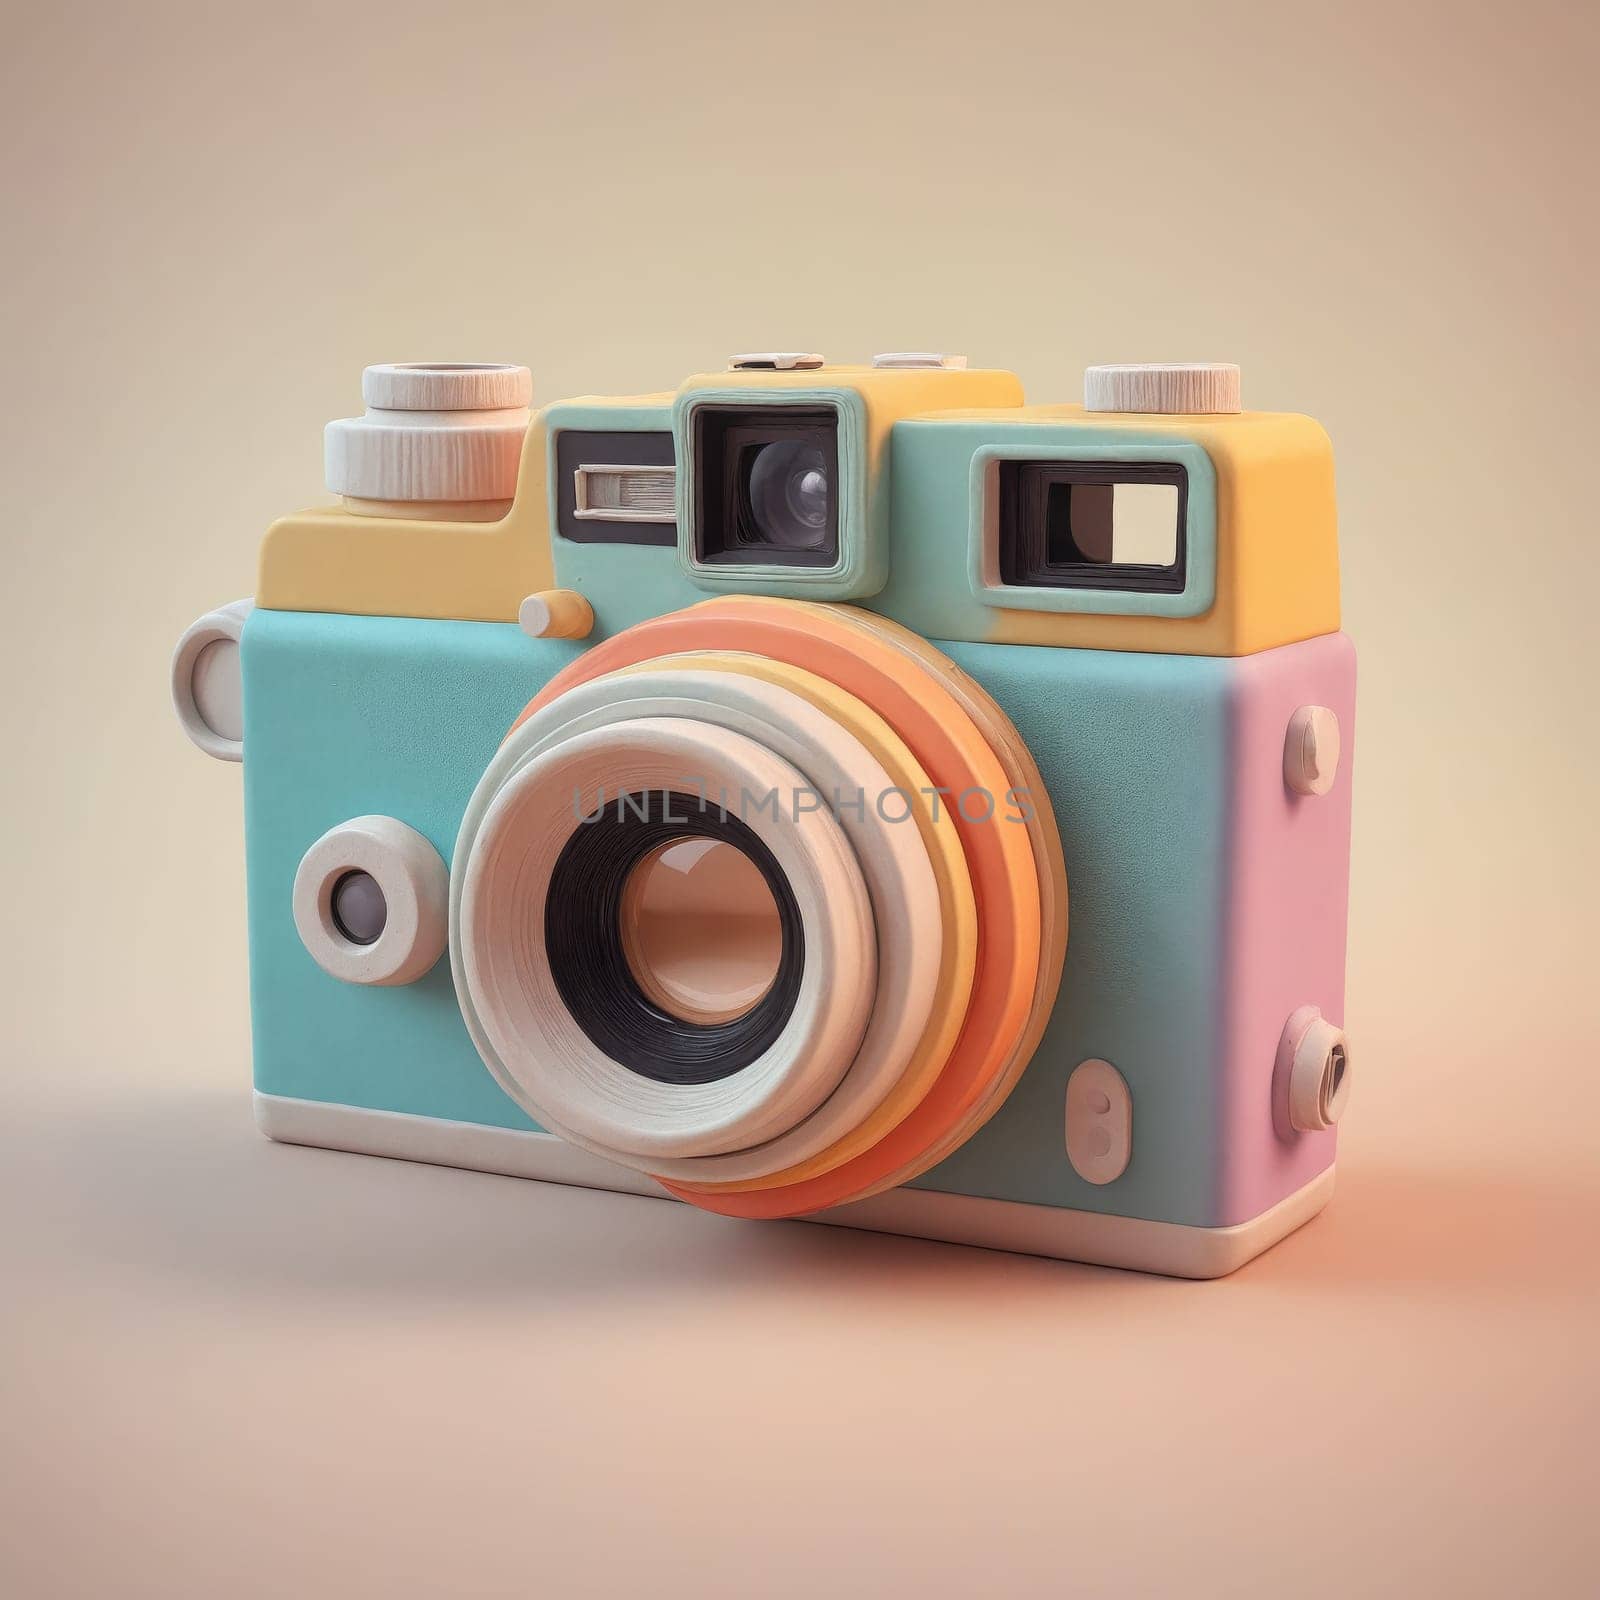 Clay-Style Film Camera Render in Pastel Colors by Andre1ns